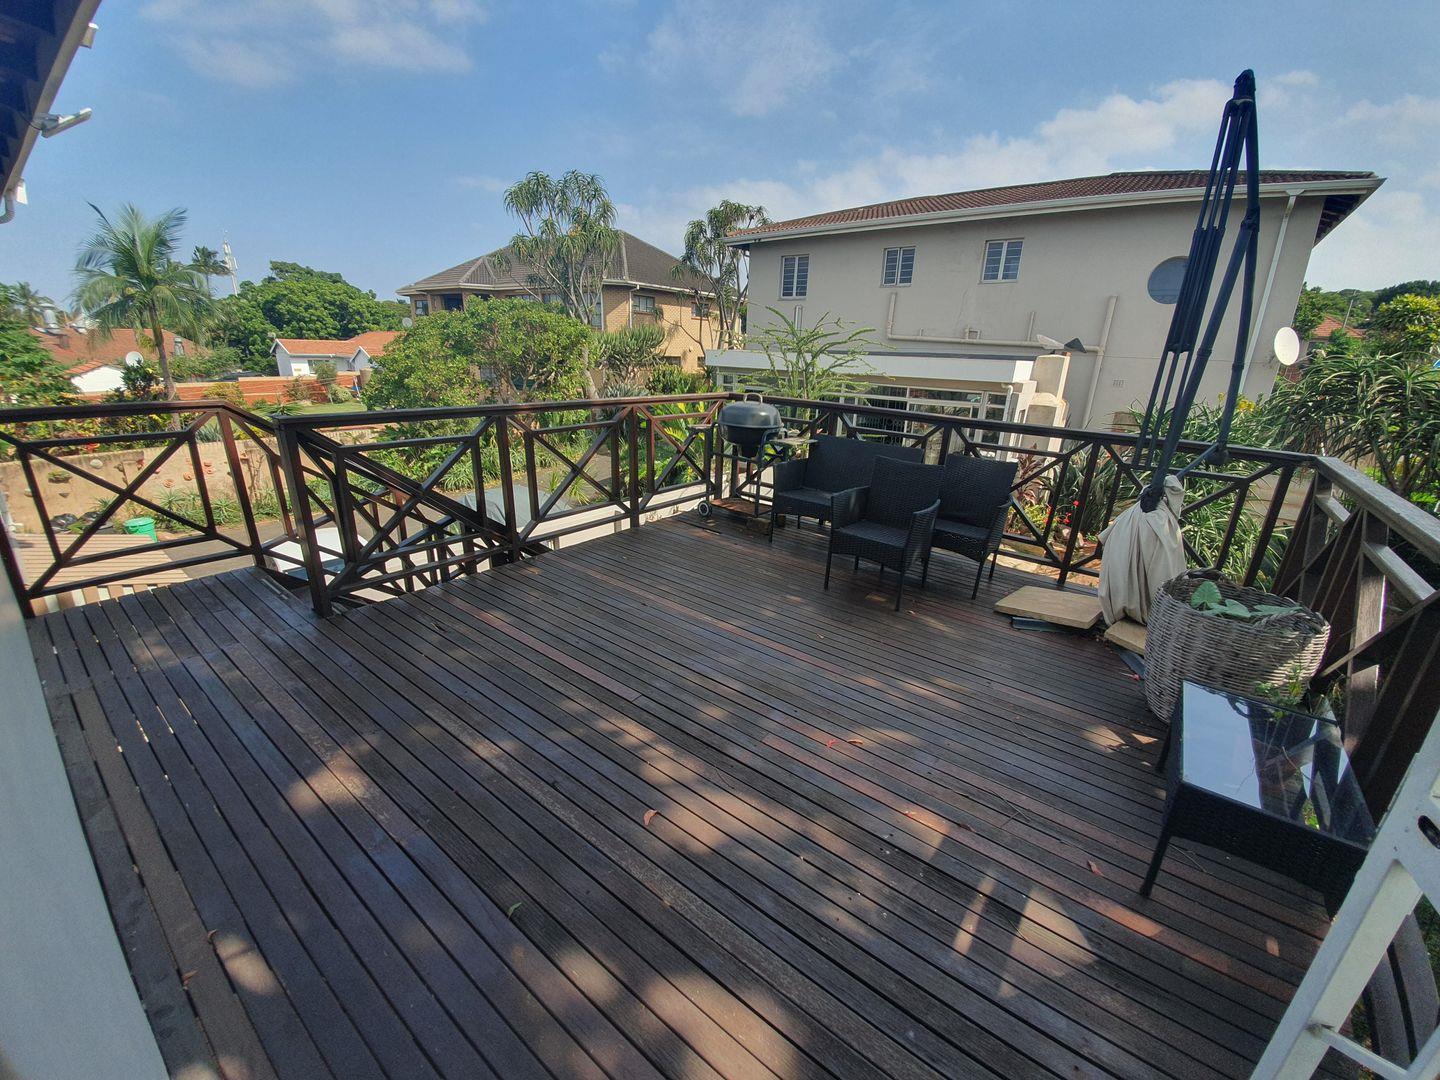 2 Bedroom House to rent in Durban North - P24-114328879